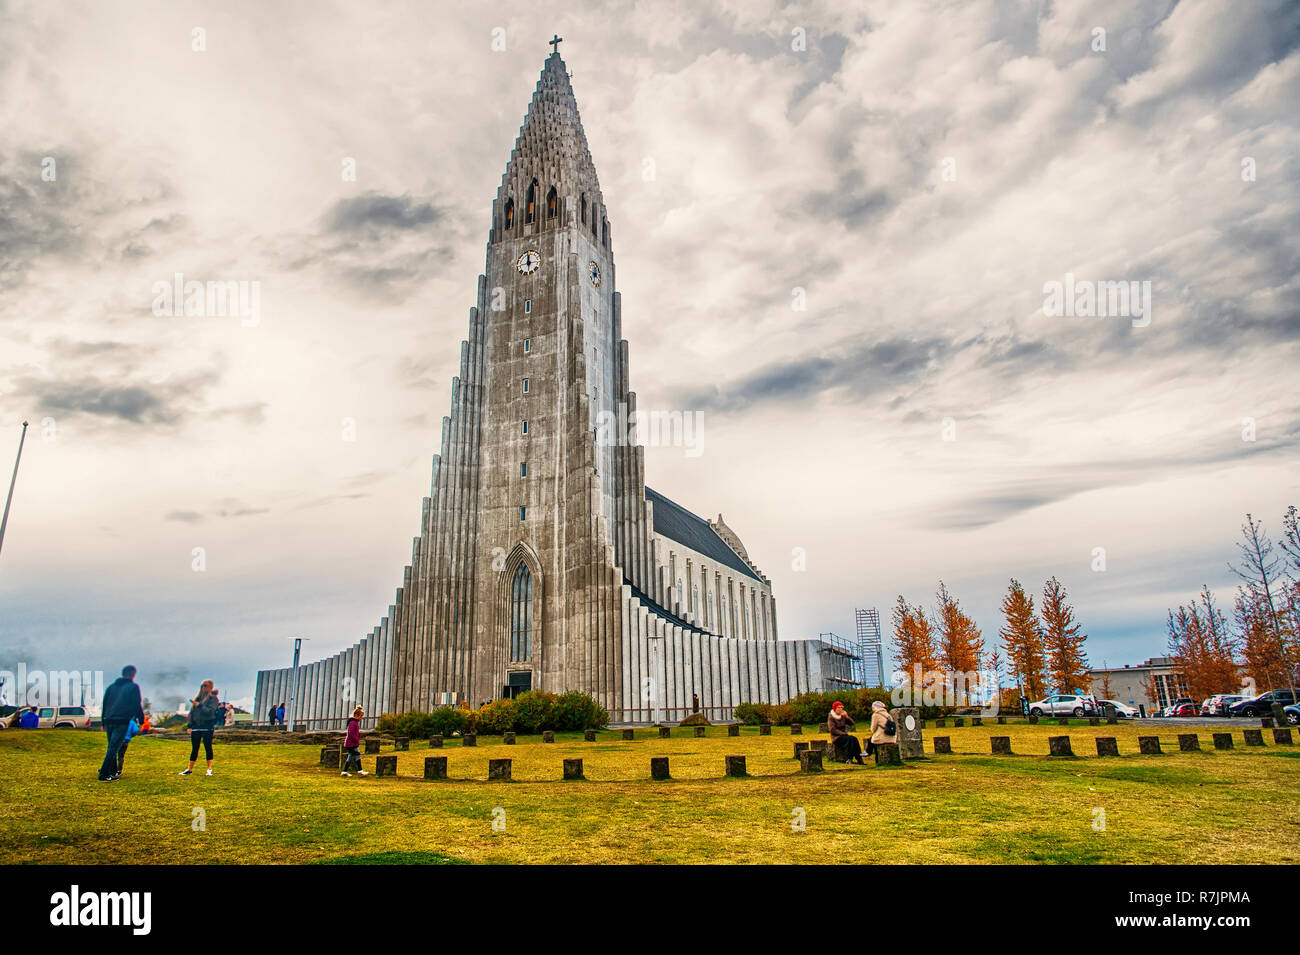 Iceland Hallgrimskirkja Cathedral in Reykjavik, Iceland, lutheran parish church, exterior in a cloudy autumn day Stock Photo